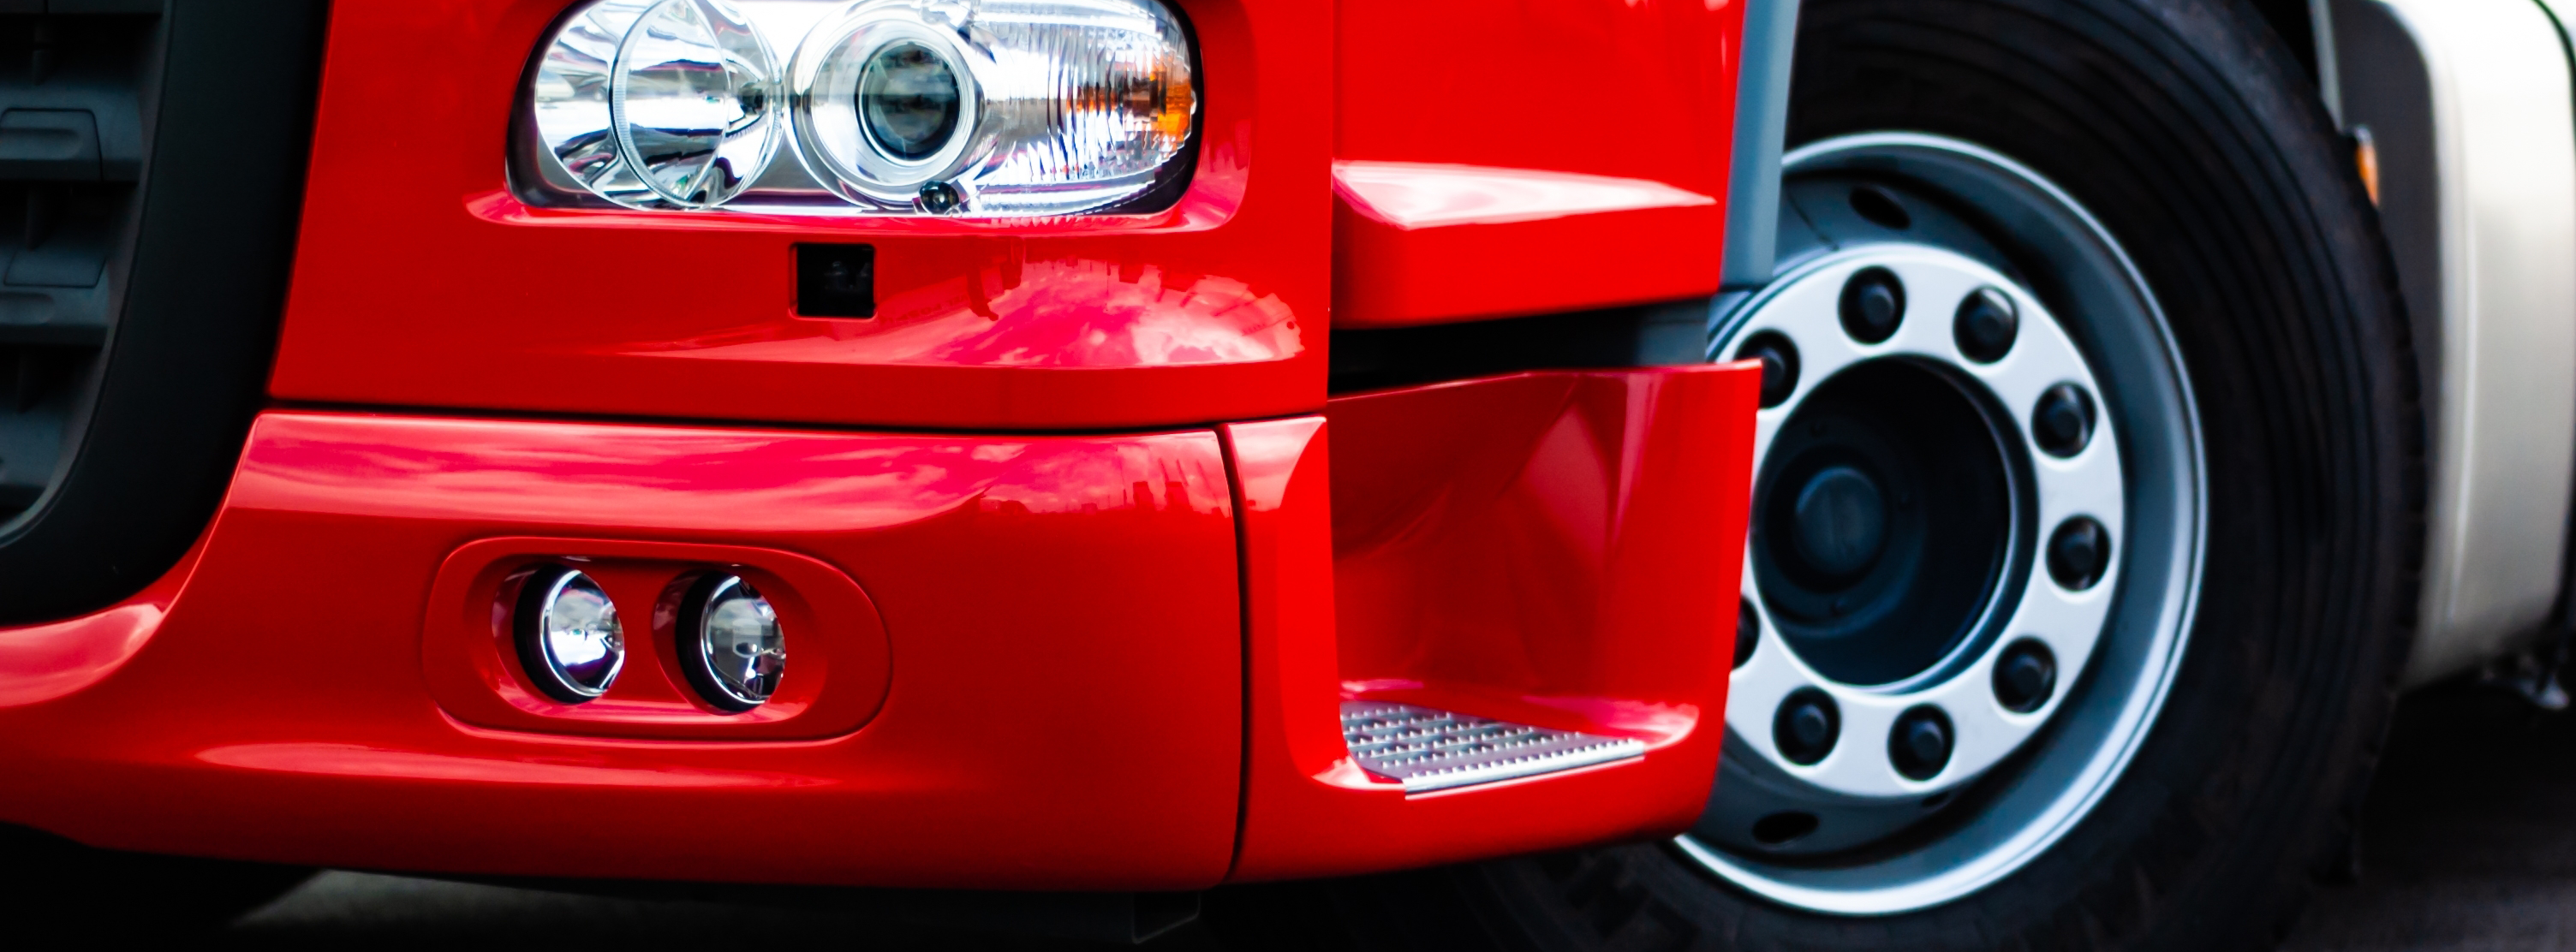 Red truck header.png